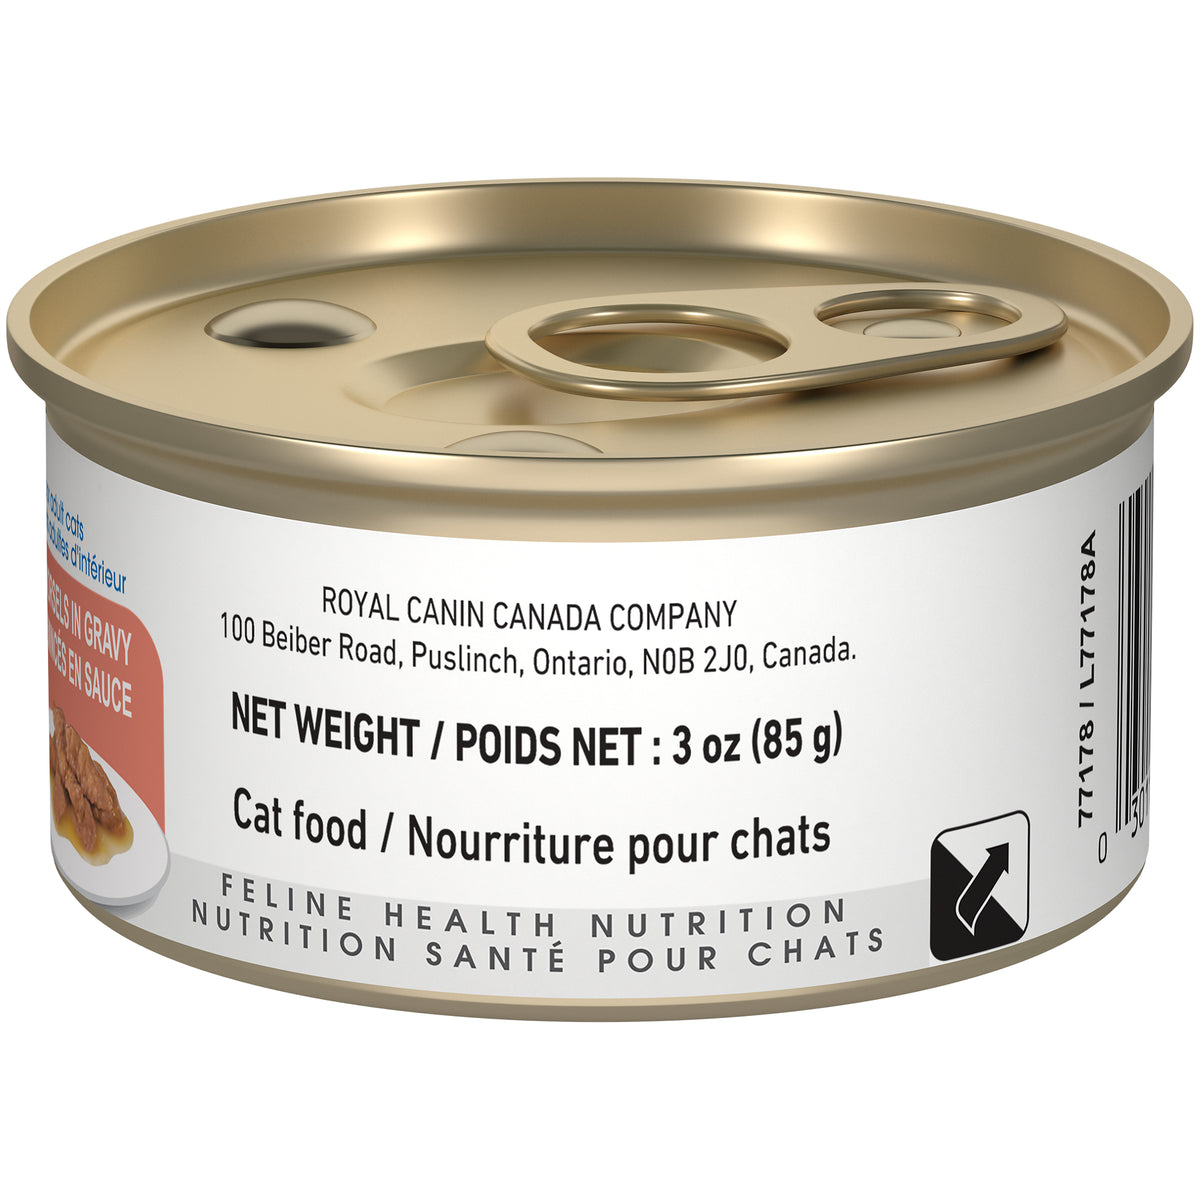 Royal Canin Indoor Adult Morsels in Gravy Canned Cat Food (85g)